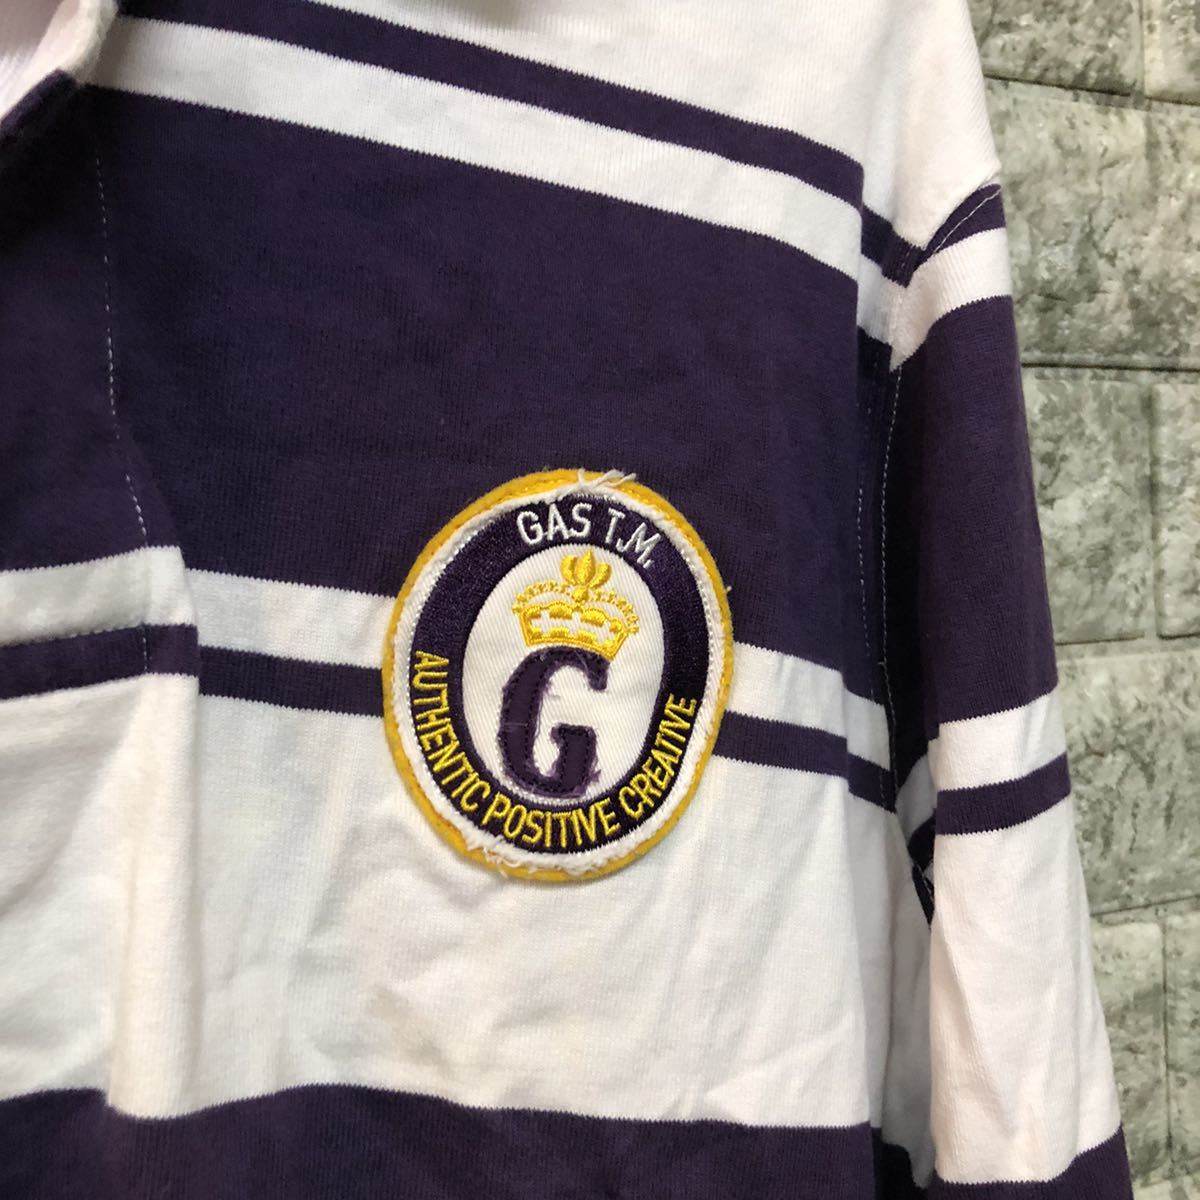 GAS gas border polo-shirt with long sleeves Rugger shirt polo-shirt with long sleeves old clothes purple white two-tone long sleeve cut and sewn Ralph Lauren L size 